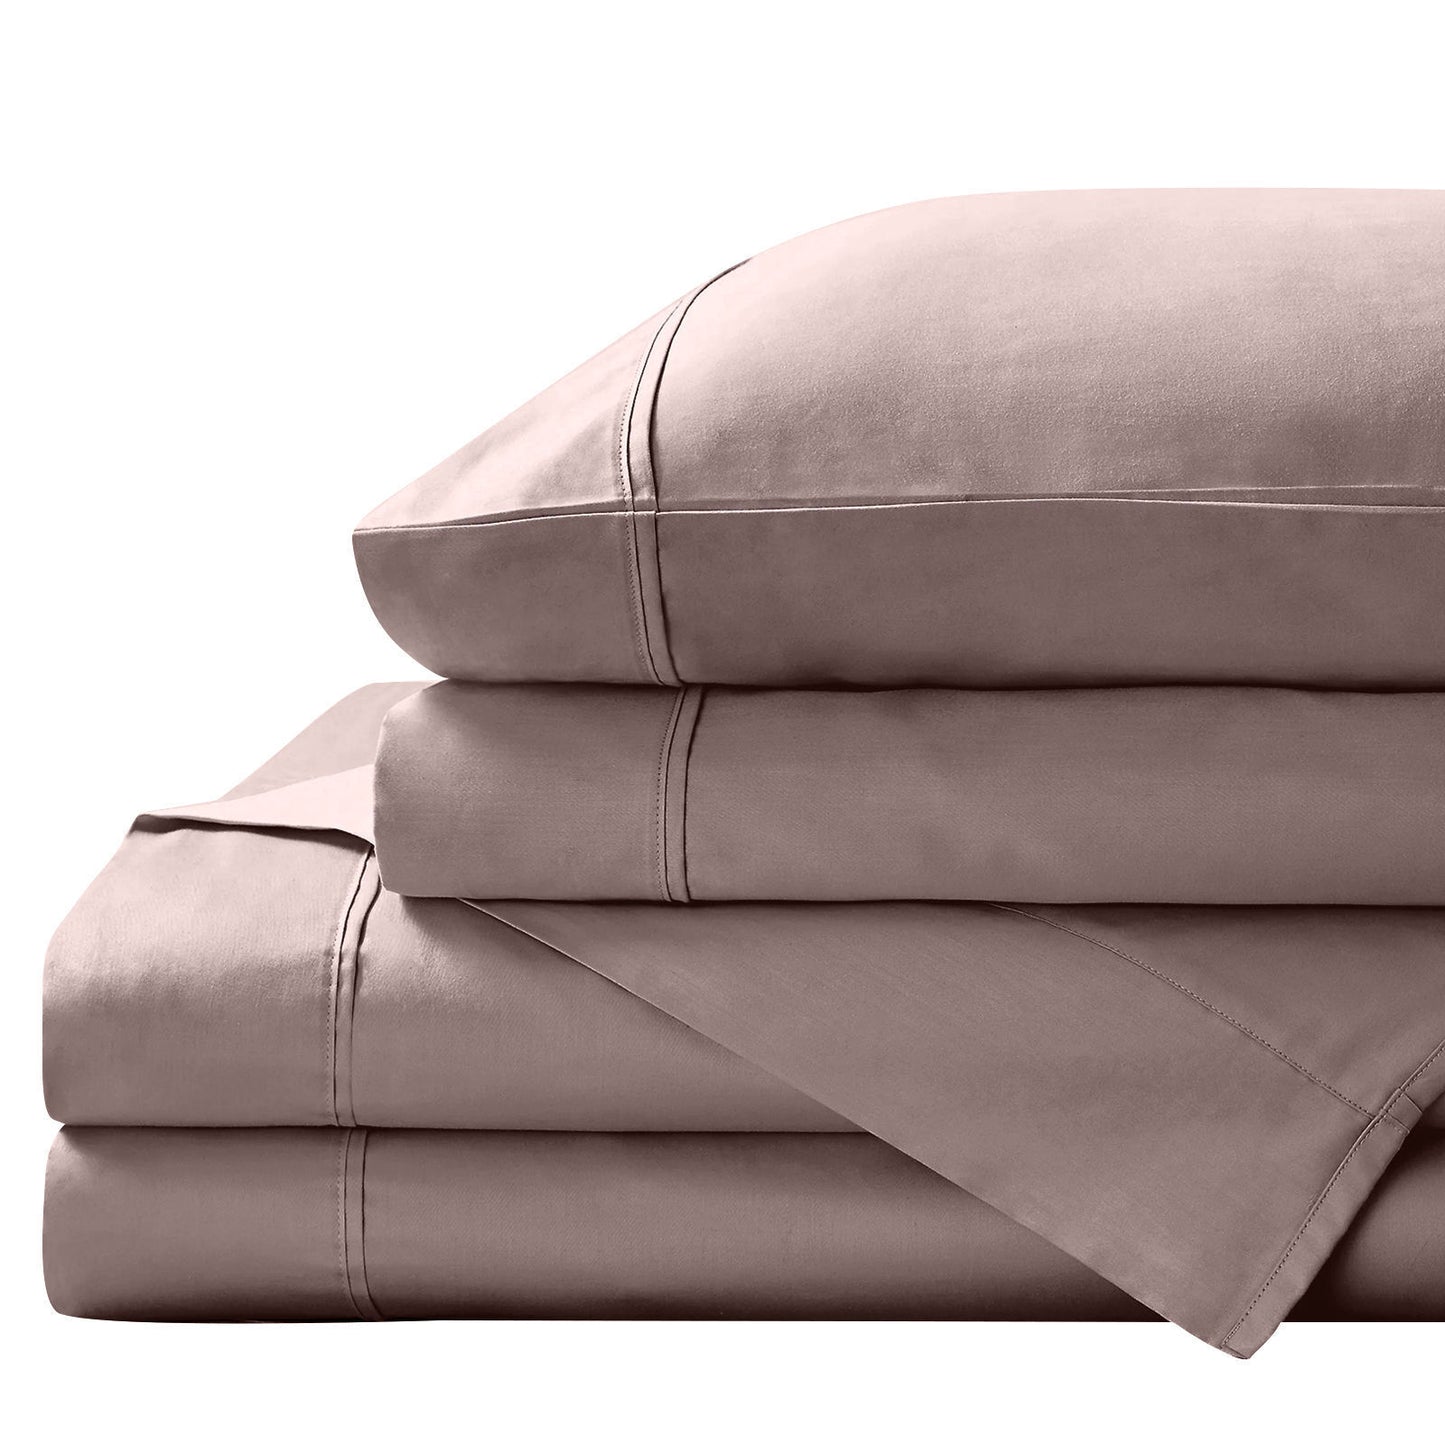 KING 1500TC 4-Piece Cotton Rich Fitted Sheet Sets - Stone